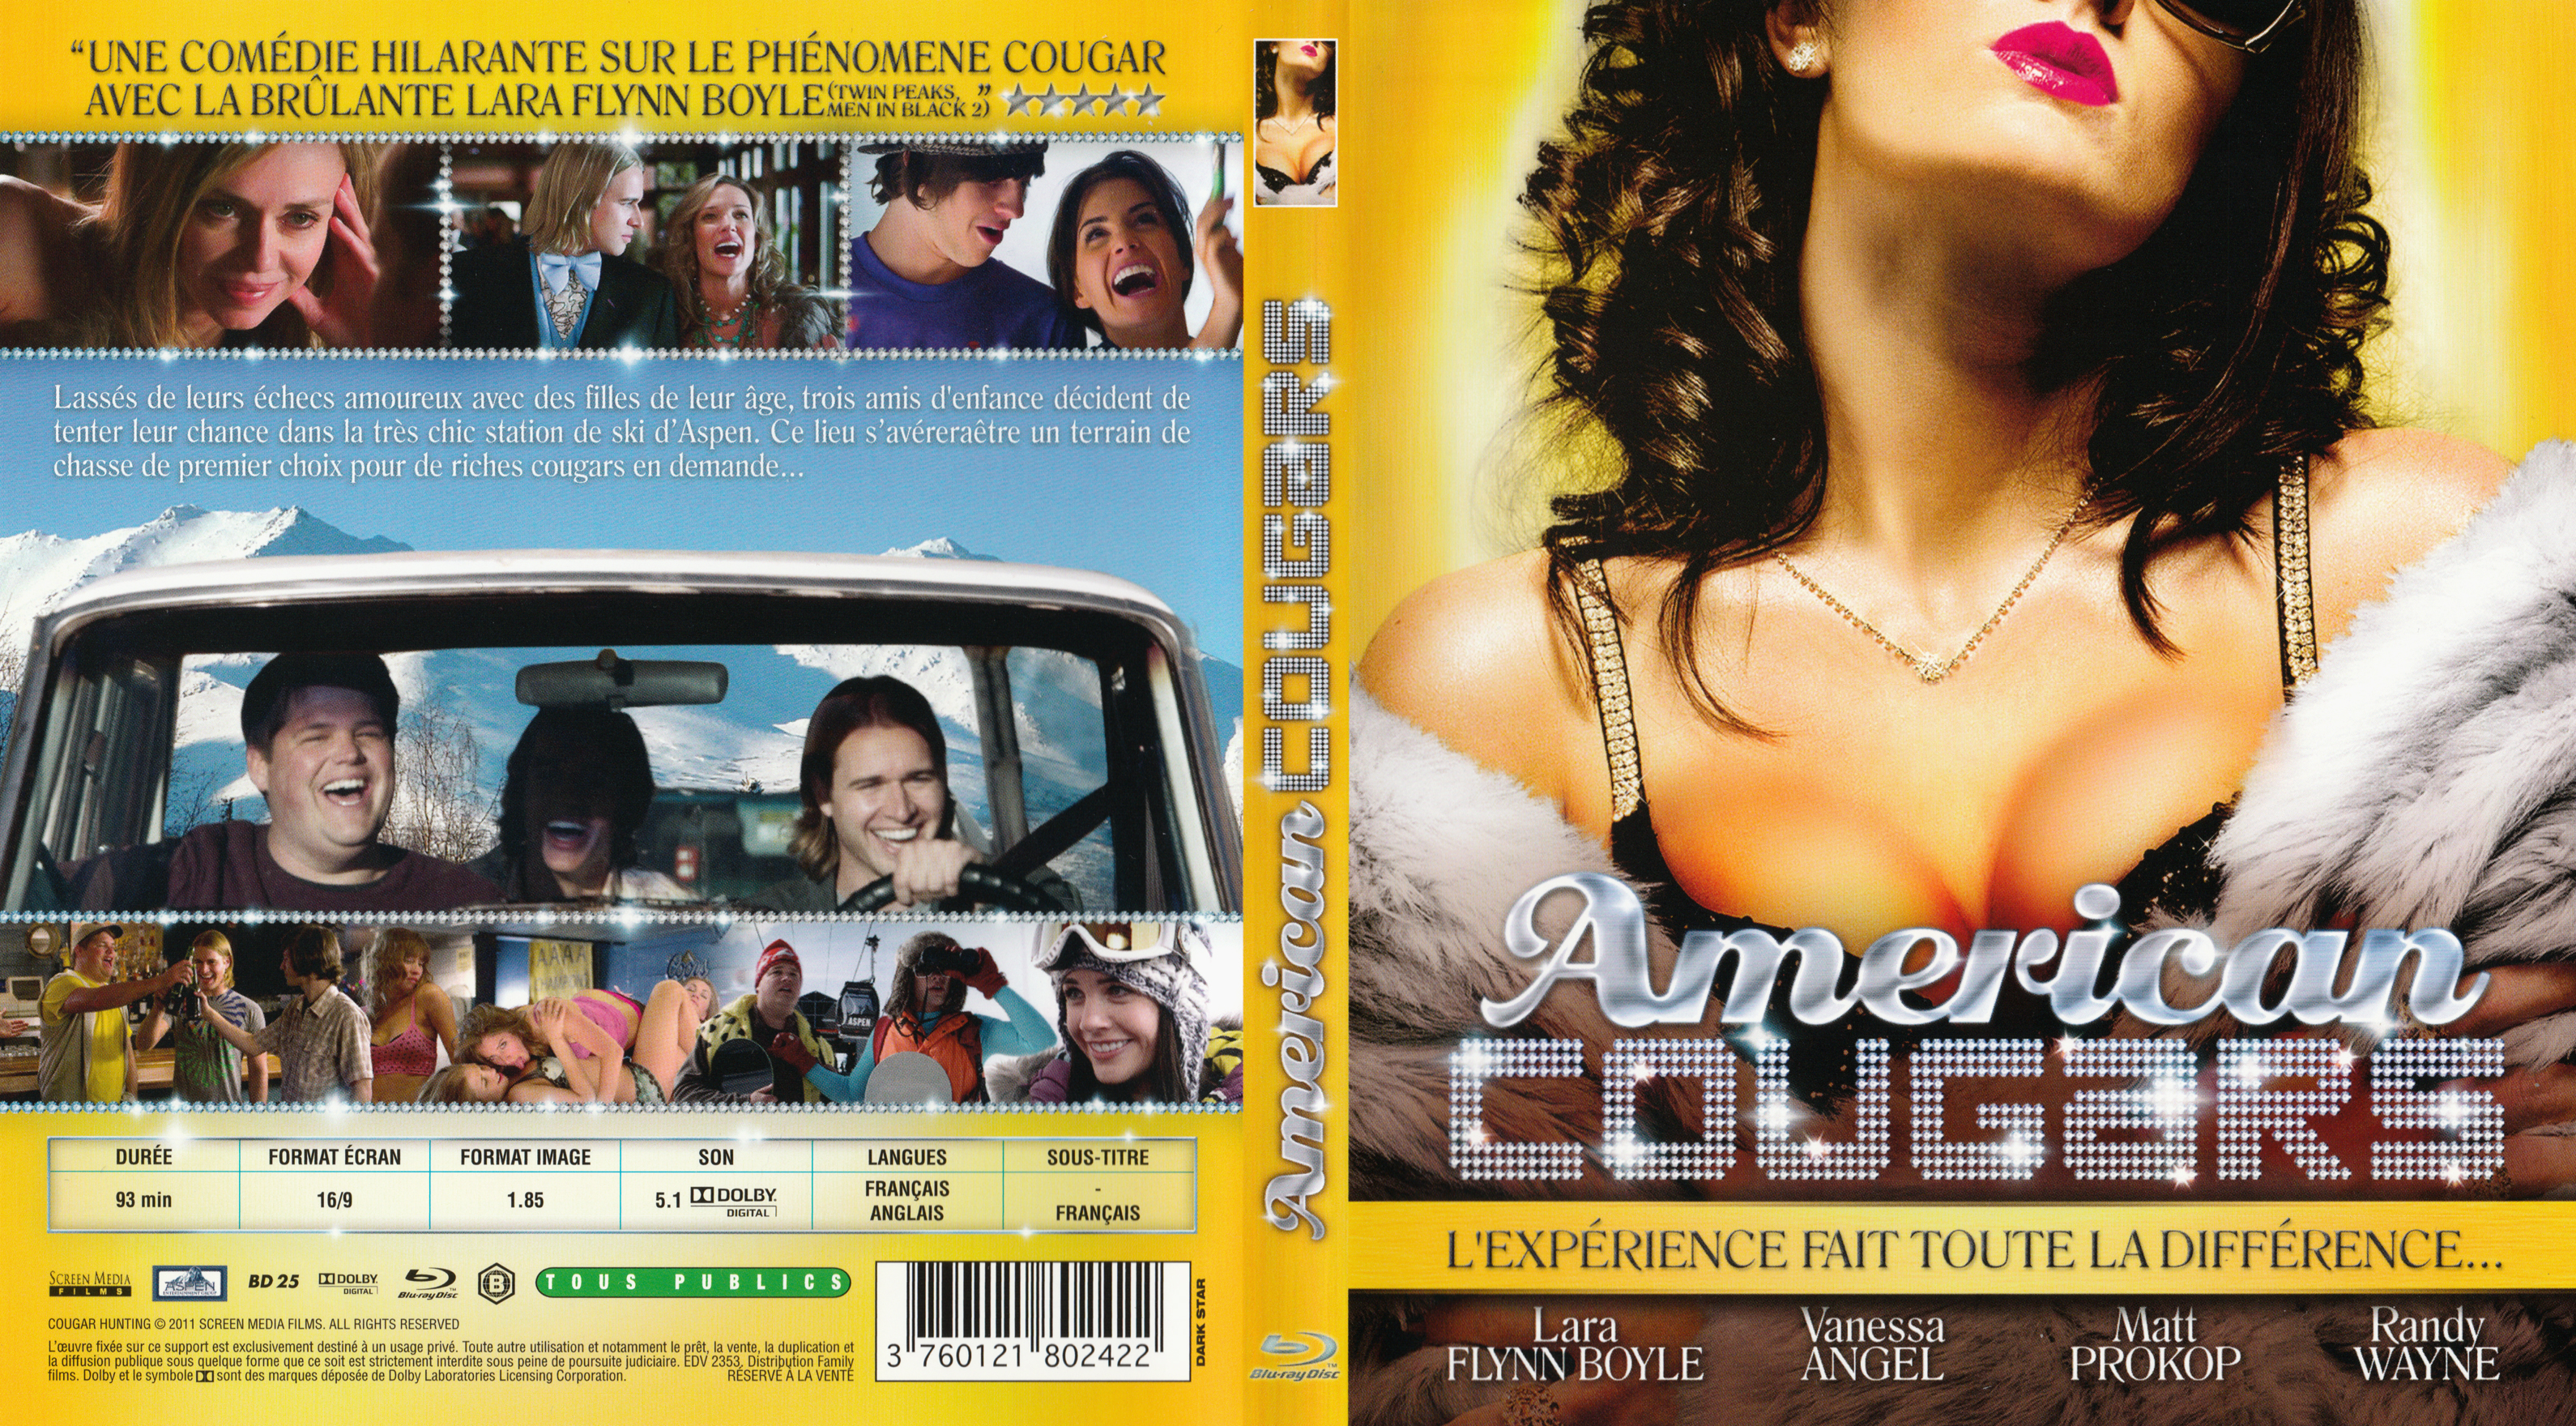 Jaquette DVD American cougars (BLU-RAY)